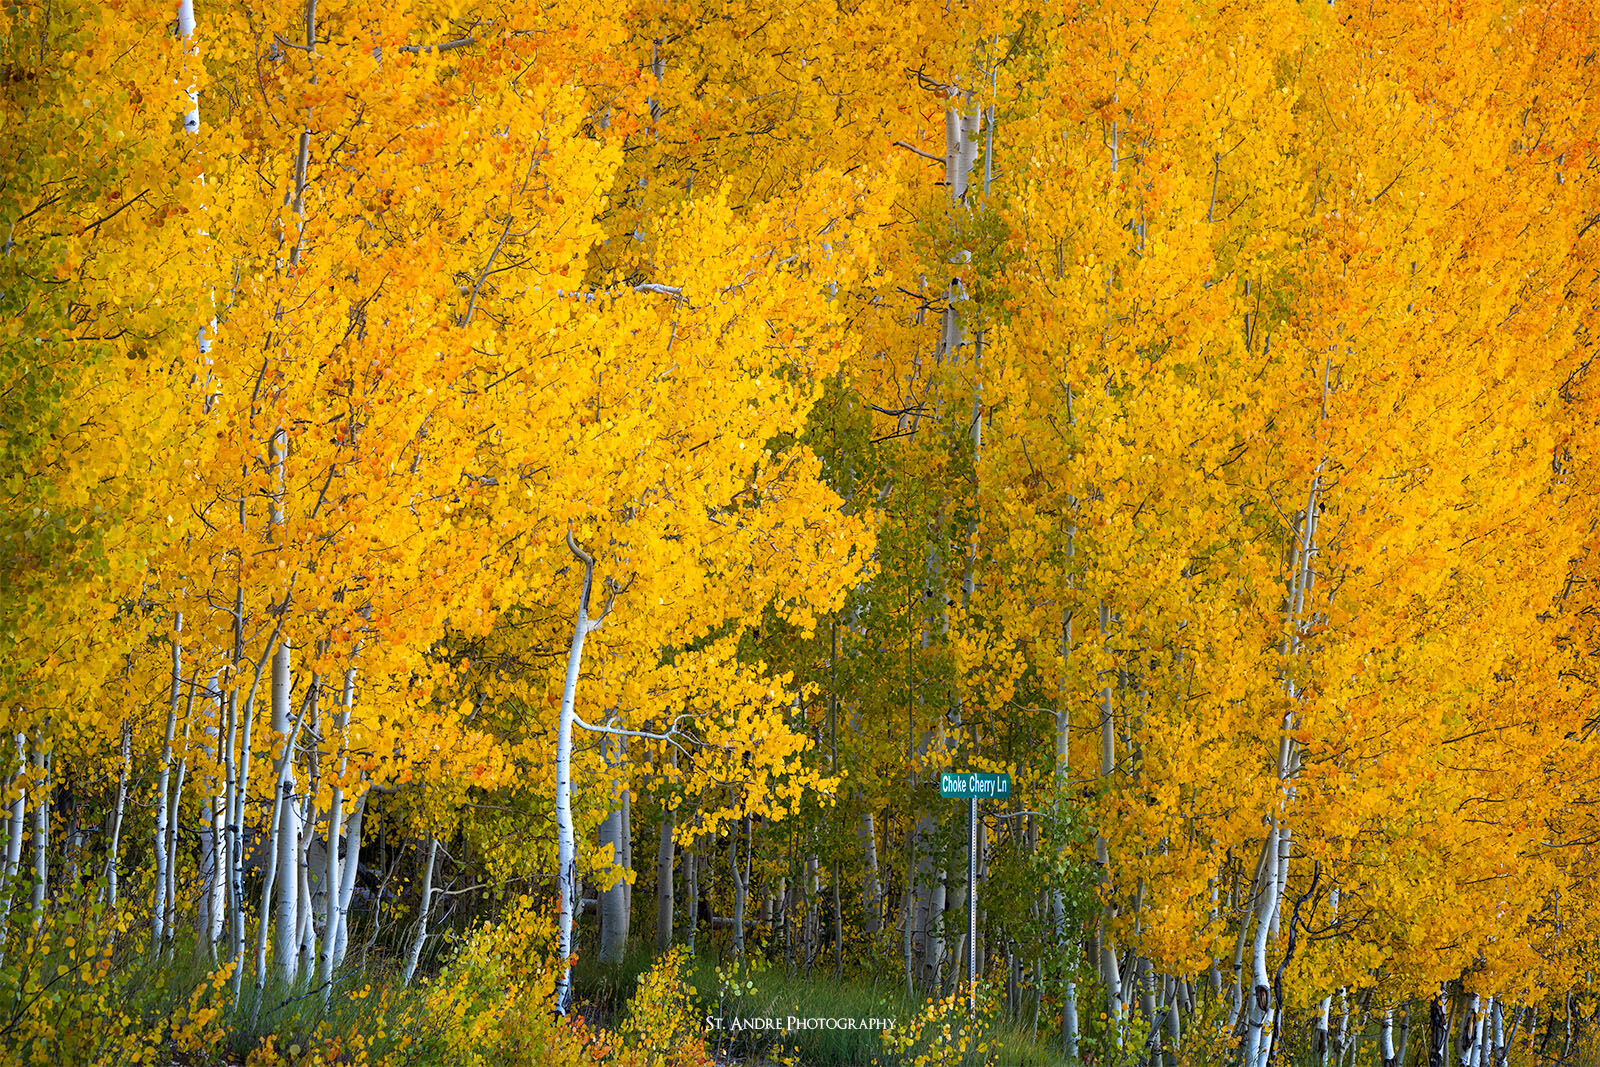 A grove of aspens with a small street post that says choke cherry lane from on tome of cedar mountain.